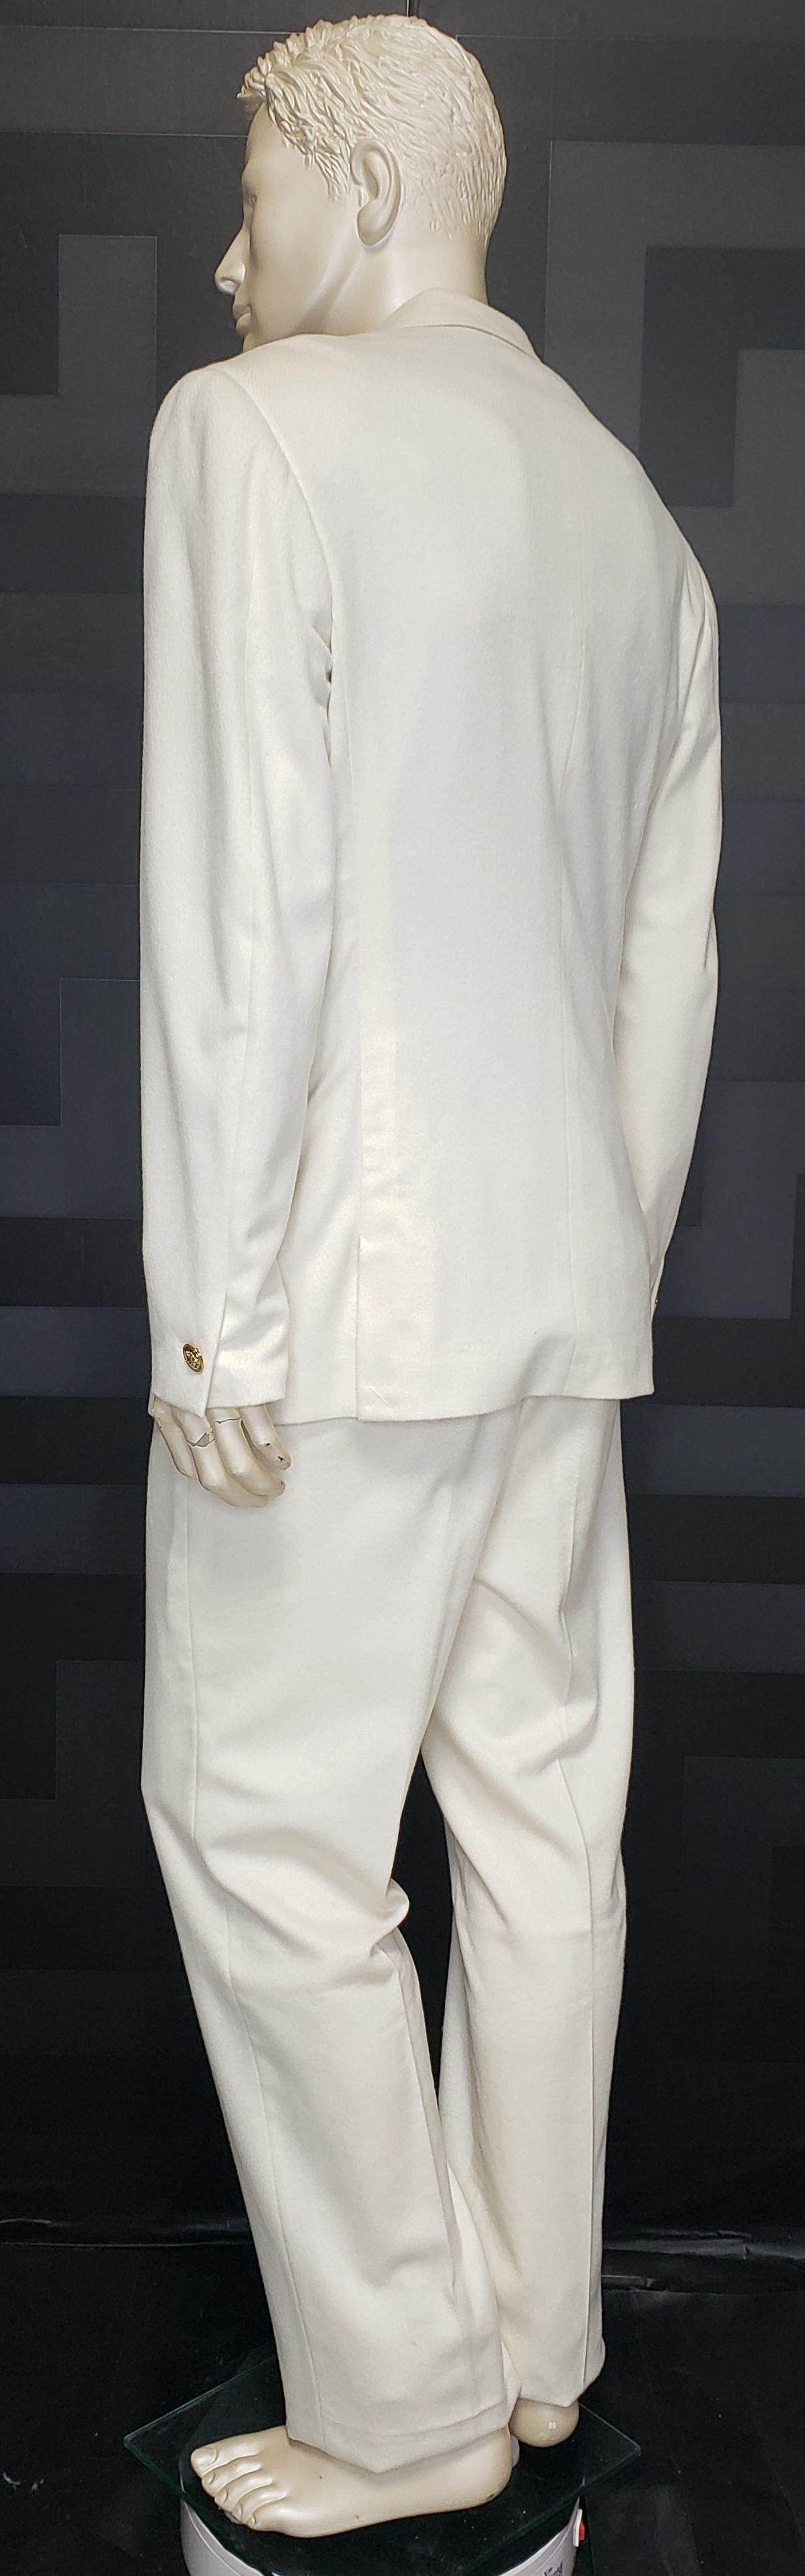 F/W2013 look #51 BRAND NEW VERSACE OFF WHITE 100% CASHMERE SUIT 50 - 40 (L) For Sale 2